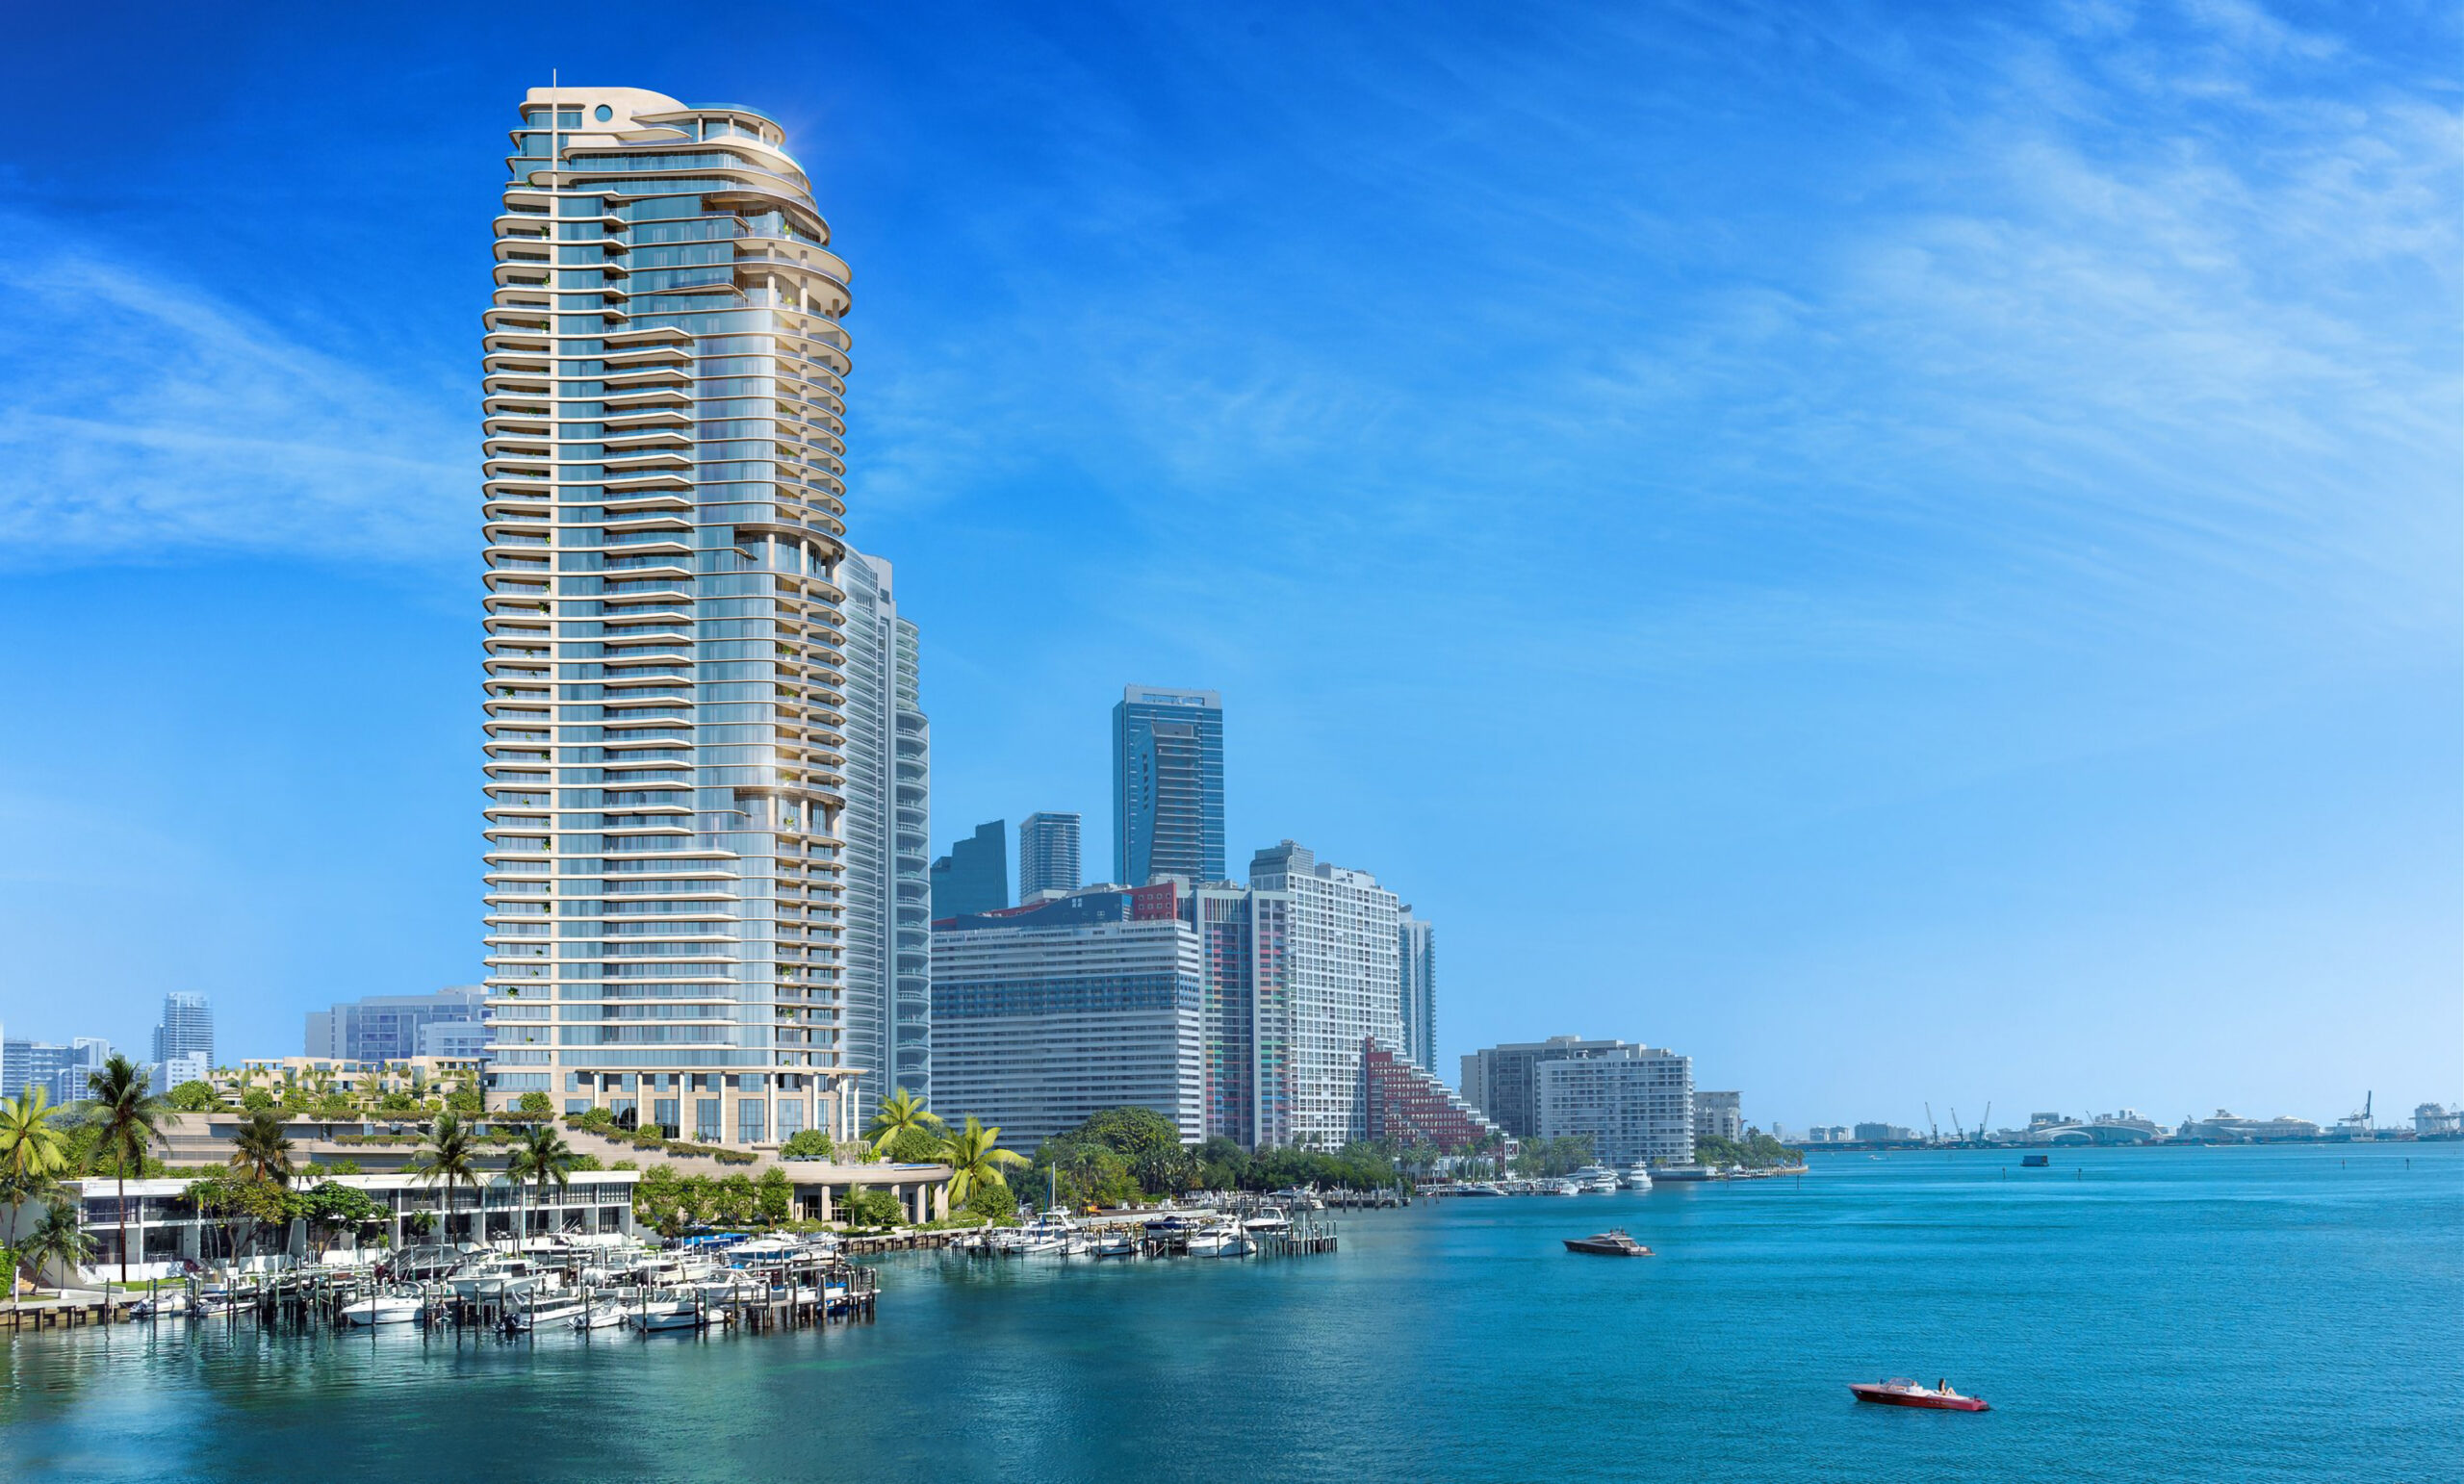 The St. Regis Residences, Miami: A Timeless Legacy Redefined